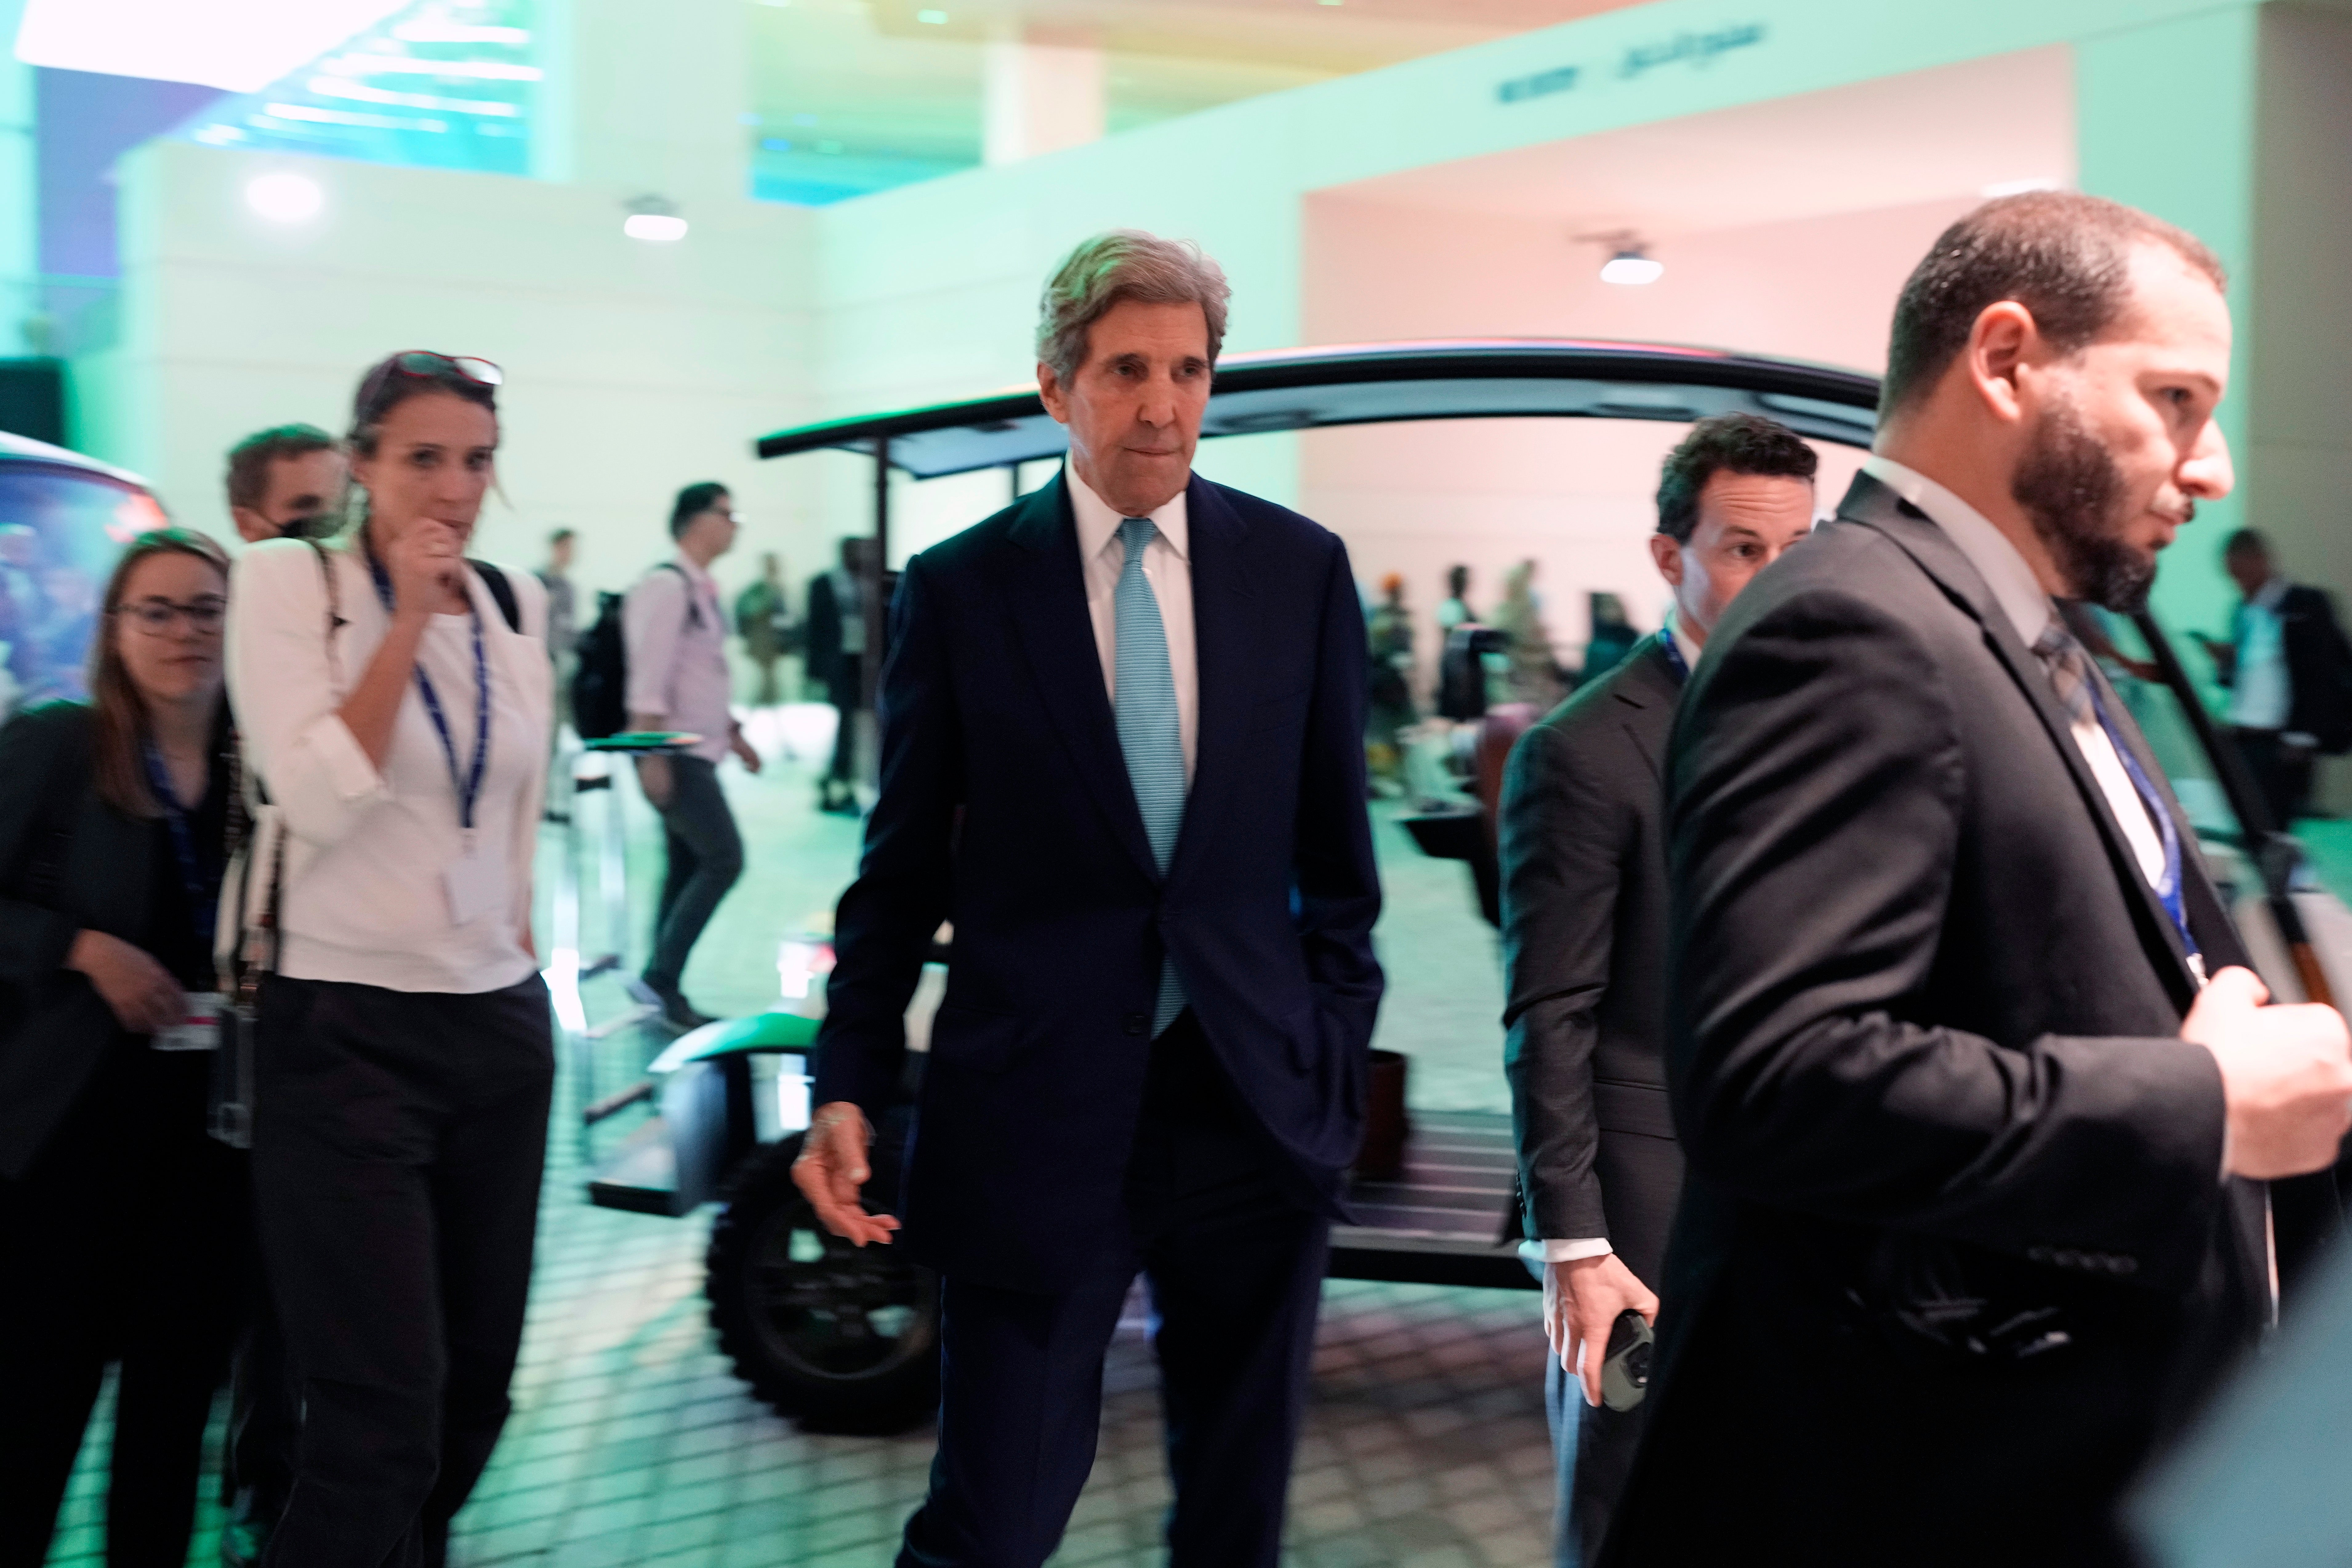 John Kerry, US special presidential envoy for climate, at the Cop28 venue on Thursday